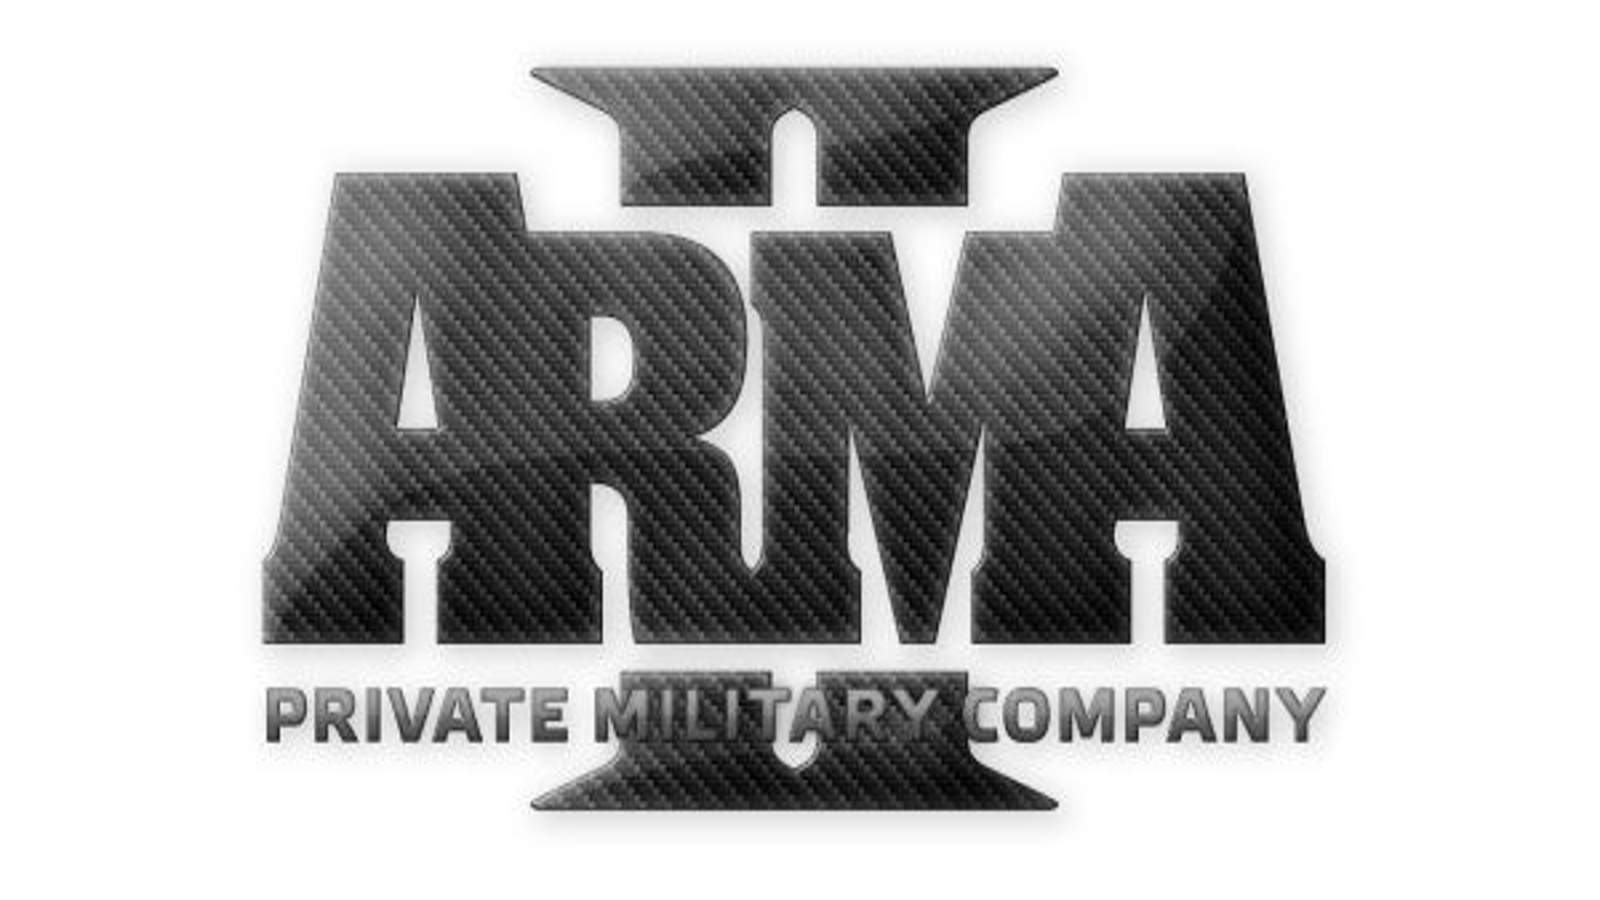 Why are good mods like this one made private? : r/arma